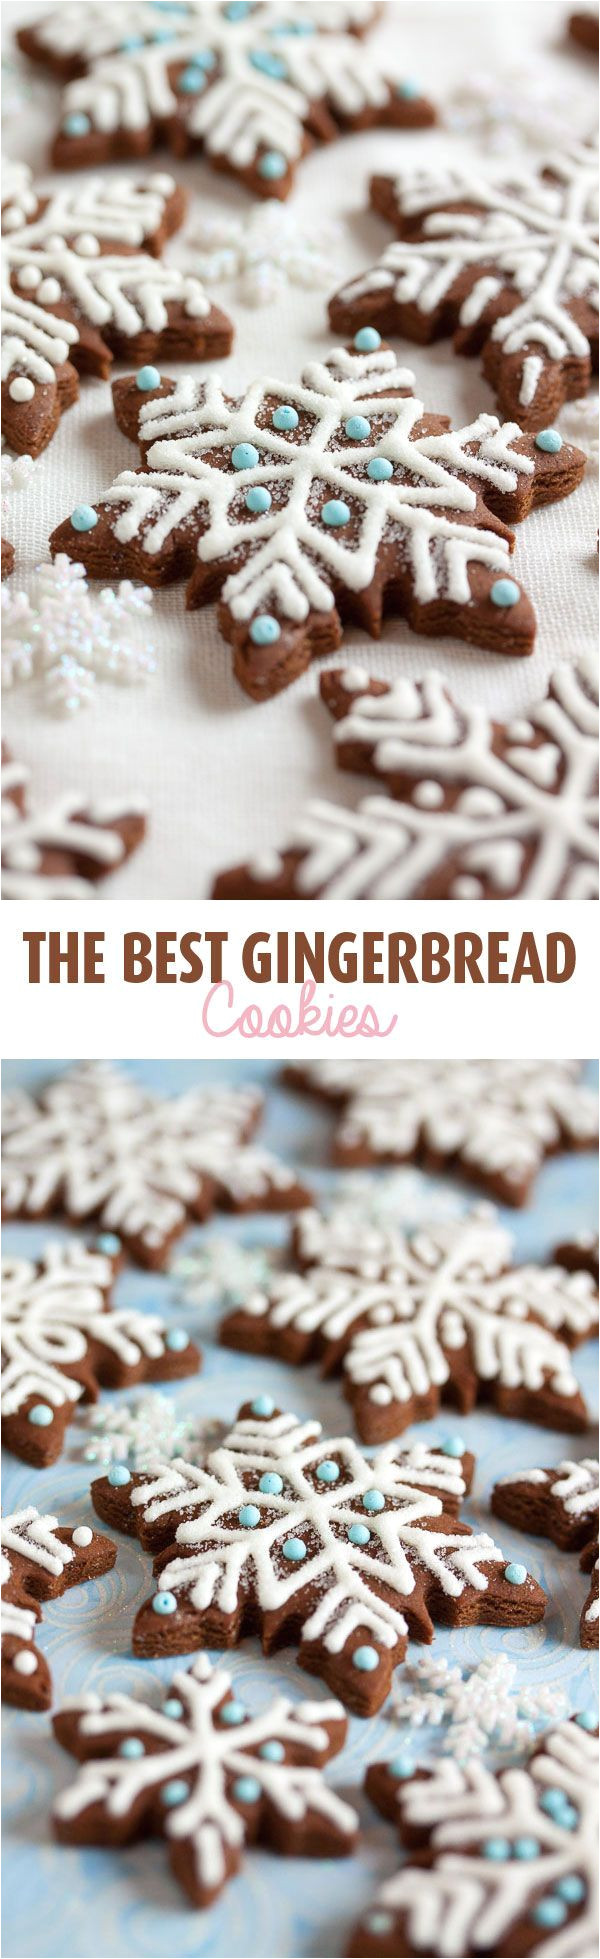 my favourite gingerbread